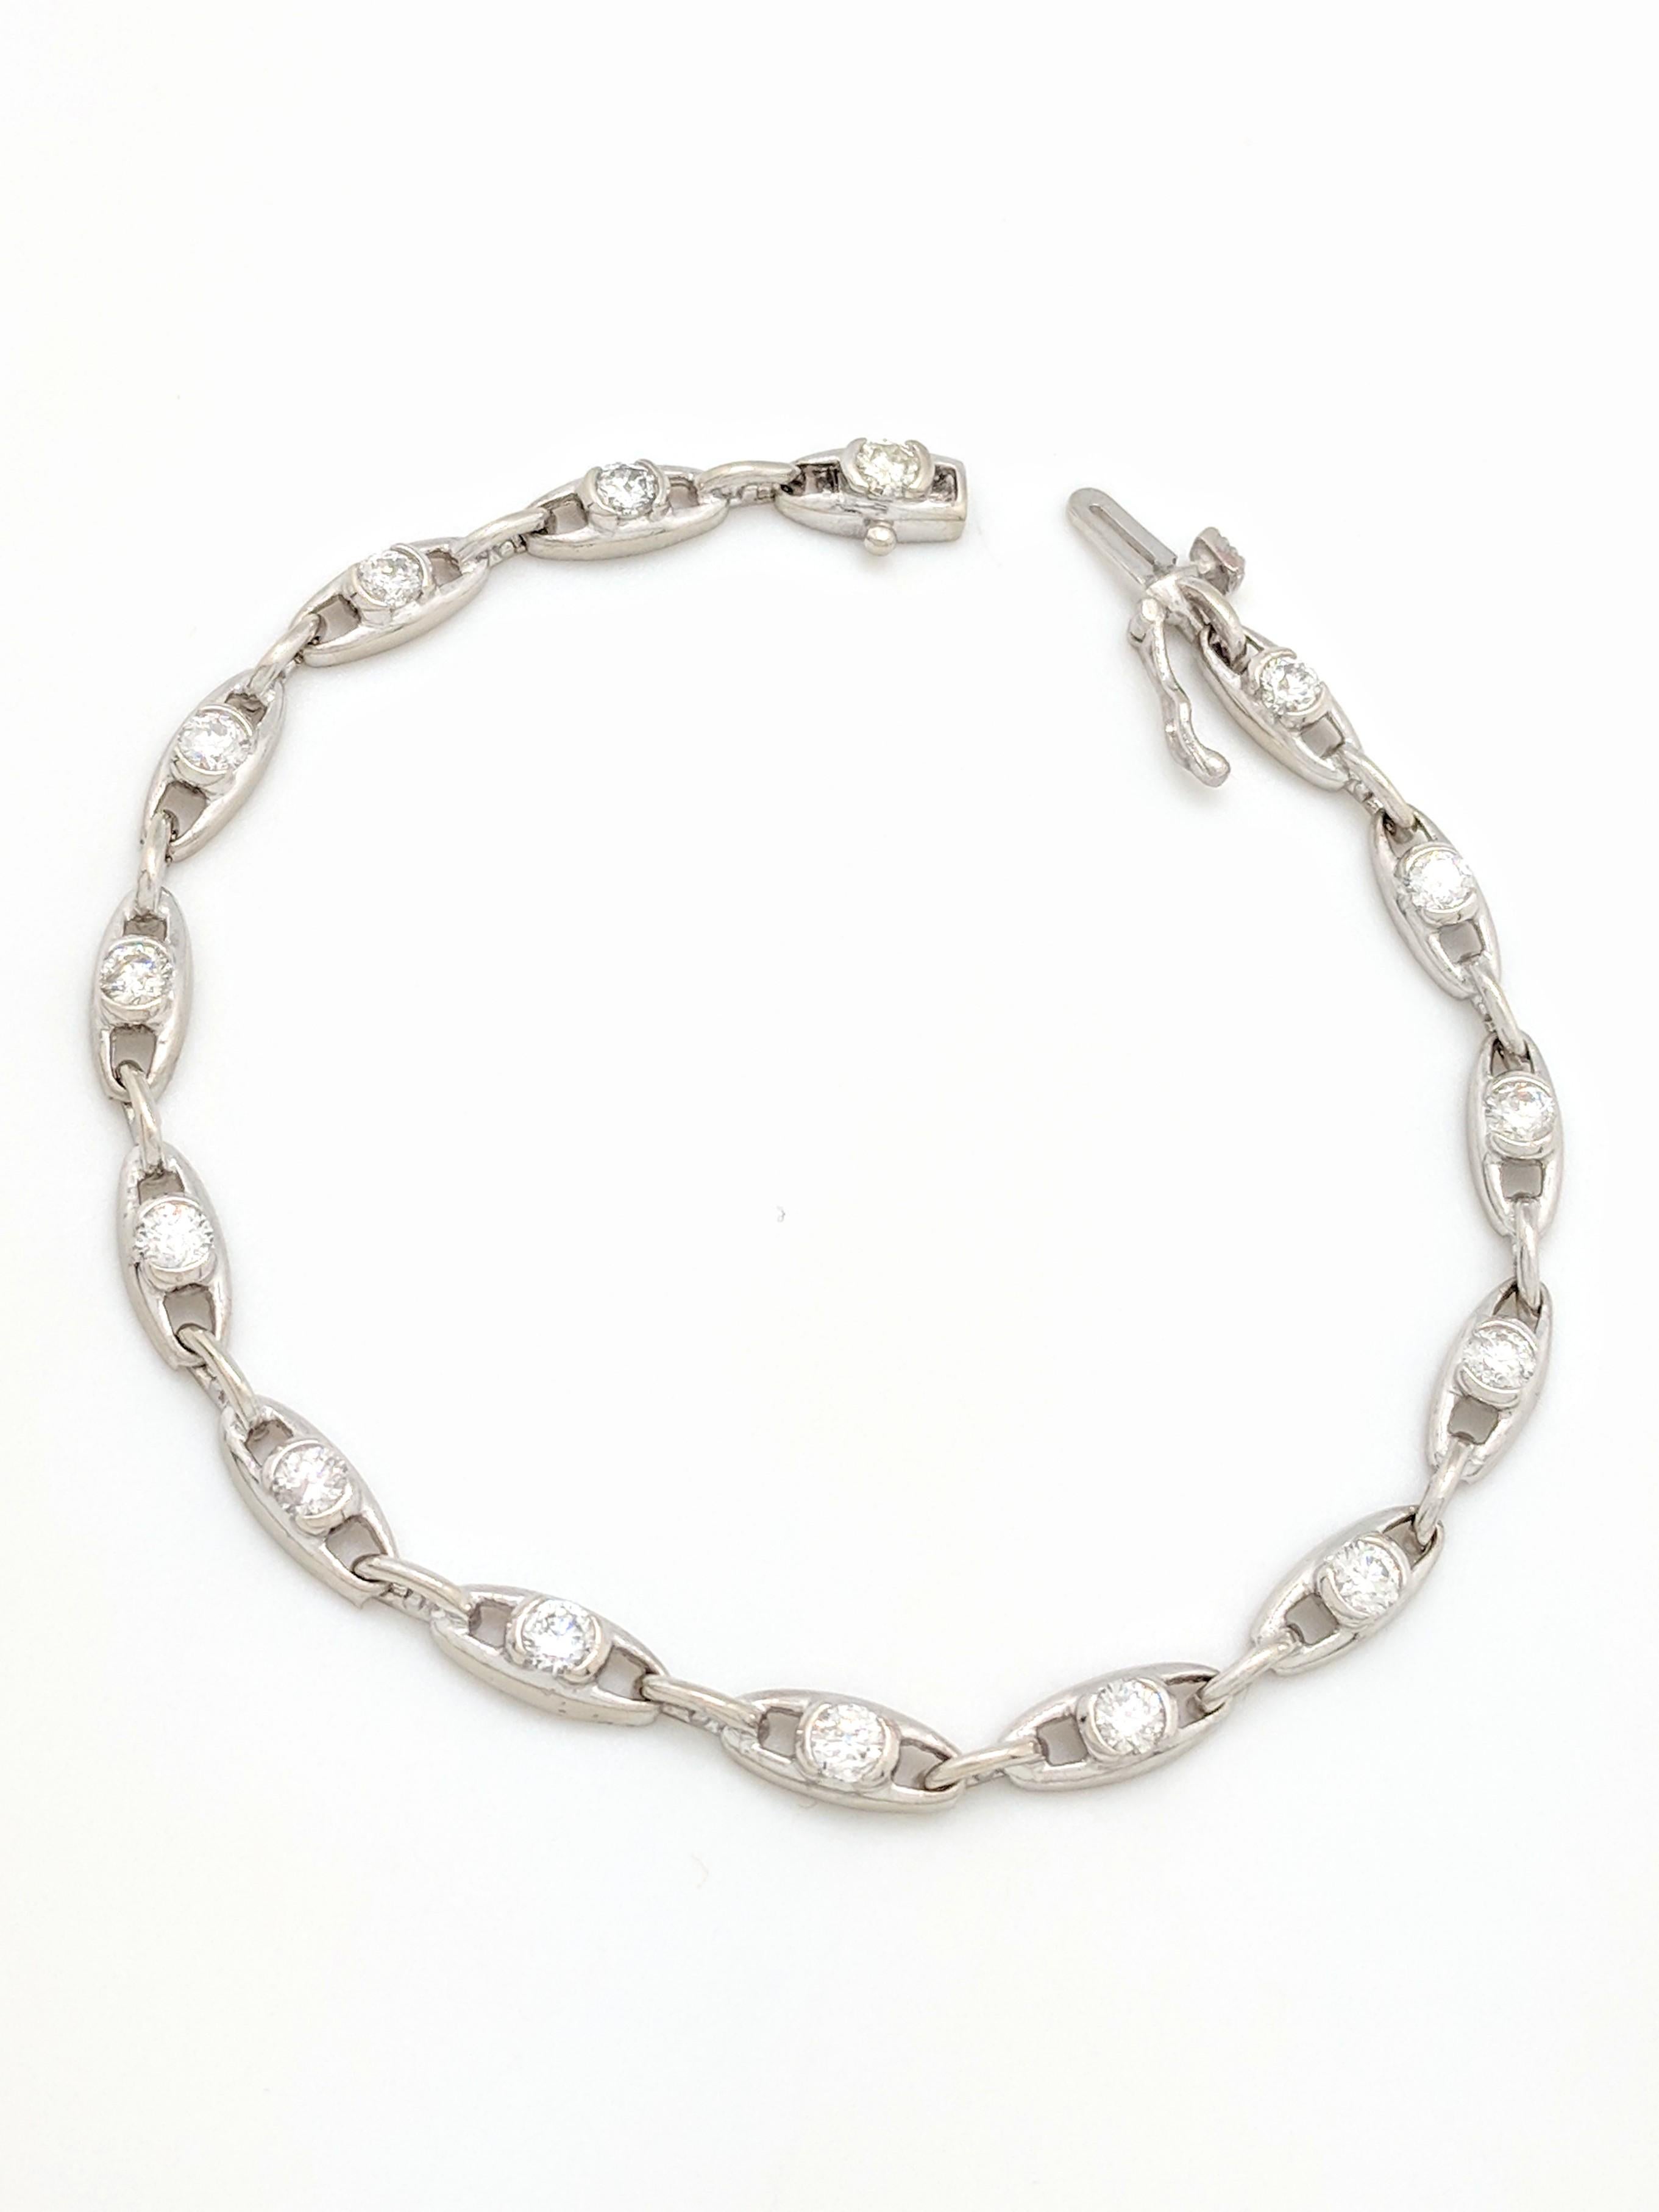 14k White Gold 2.25ctw Diamond Tennis Bracelet

You are viewing a Beautiful Diamond Tennis Bracelet that is sure to make a statement!

The bracelet is crafted from 14k white gold, measures 4.5mm in width and weighs 9.6 grams. It features (15) .15ct